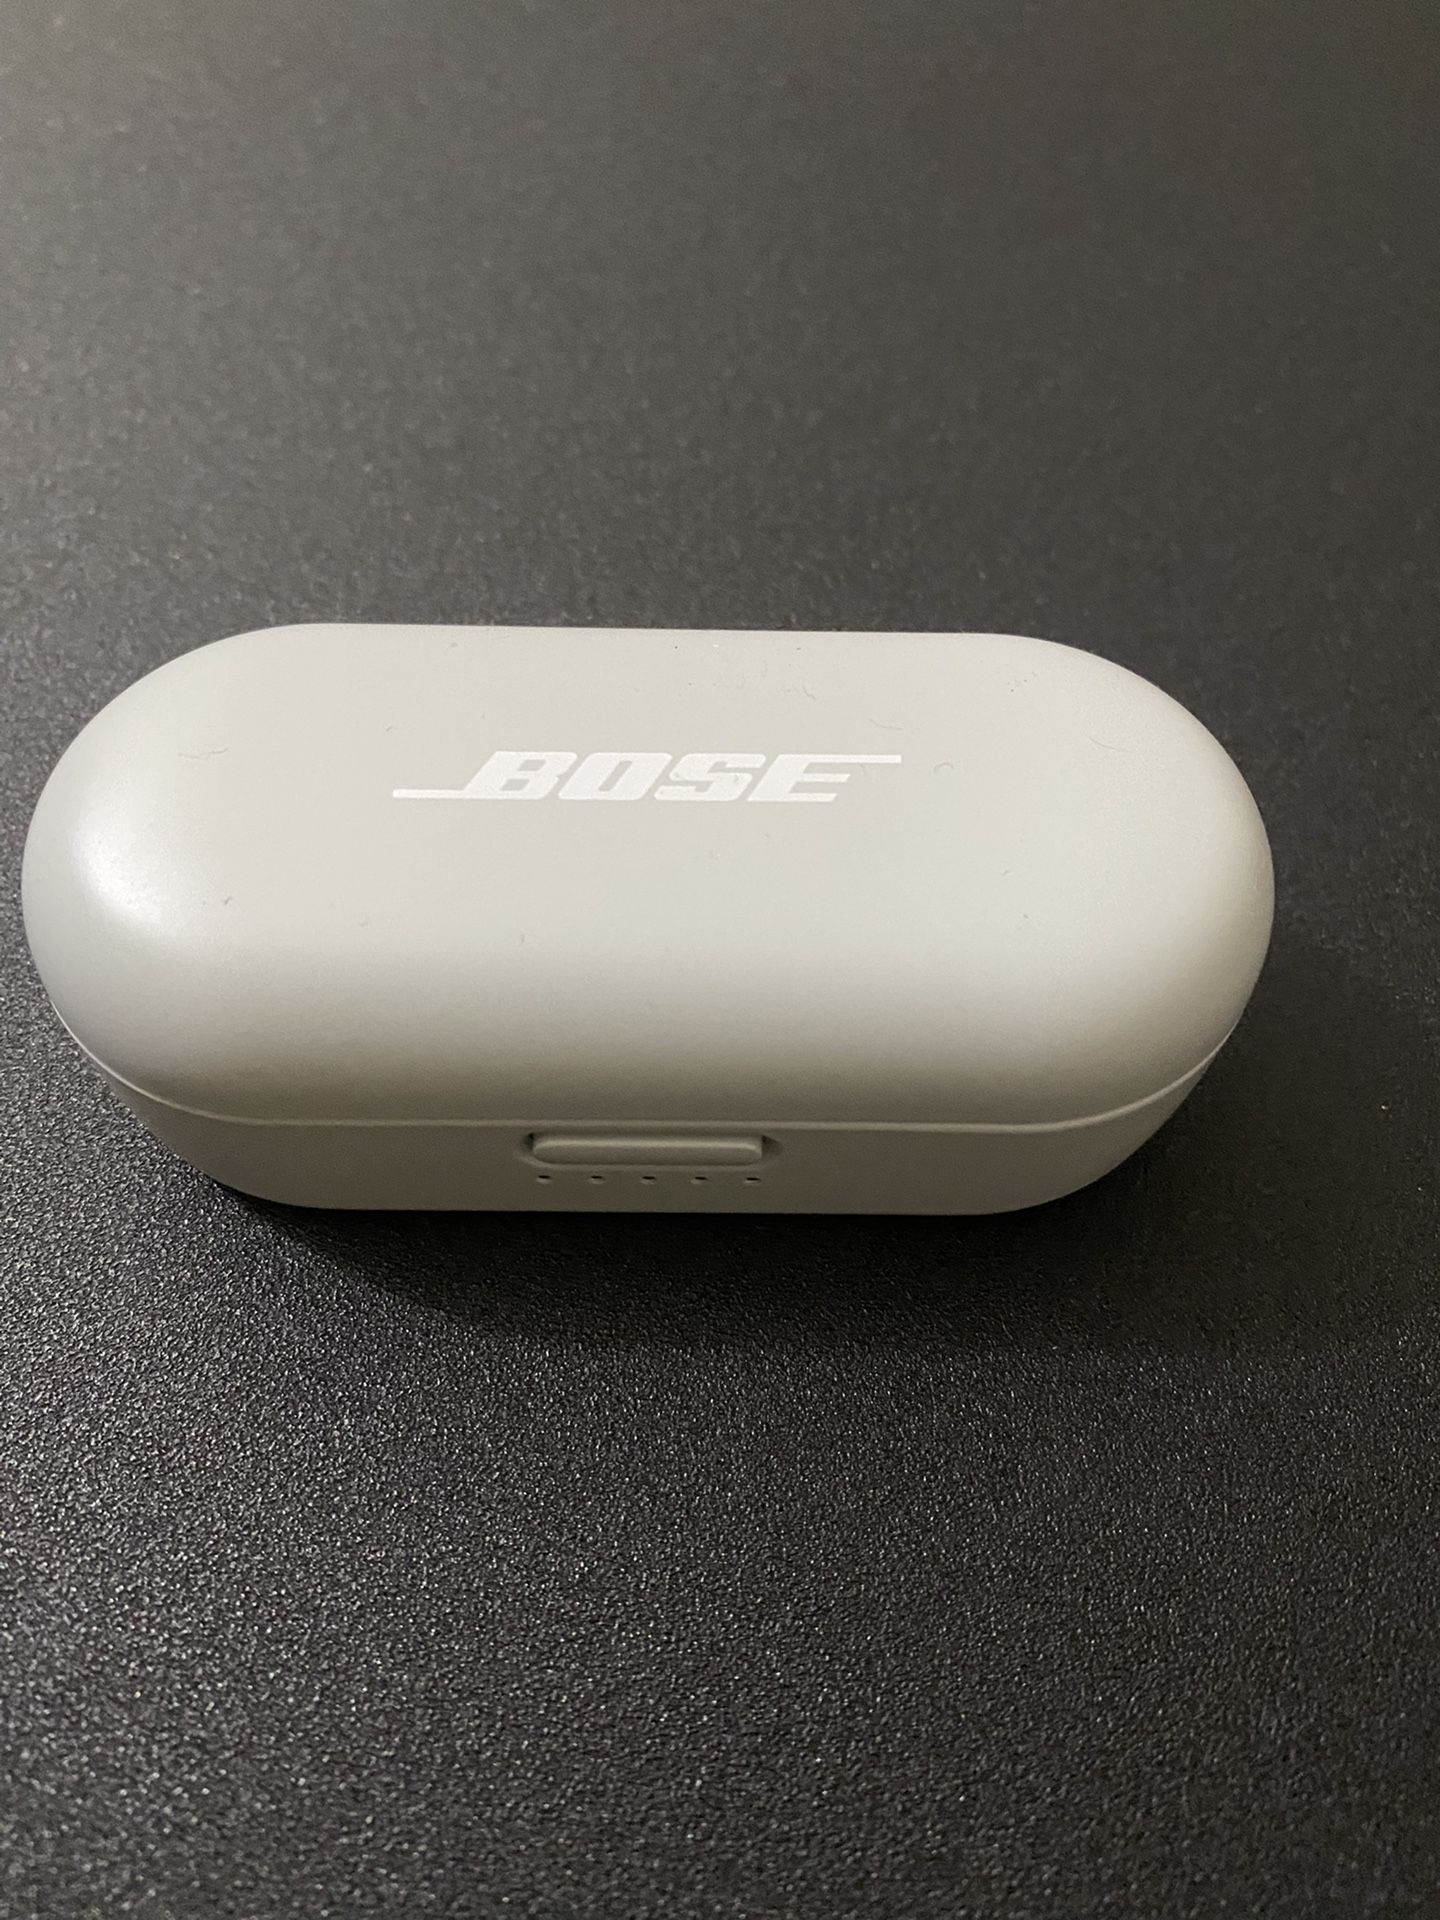 New Bose Sport Earbuds - True Wireless Earphones - Bluetooth In Ear Headphones for Workouts and Running,